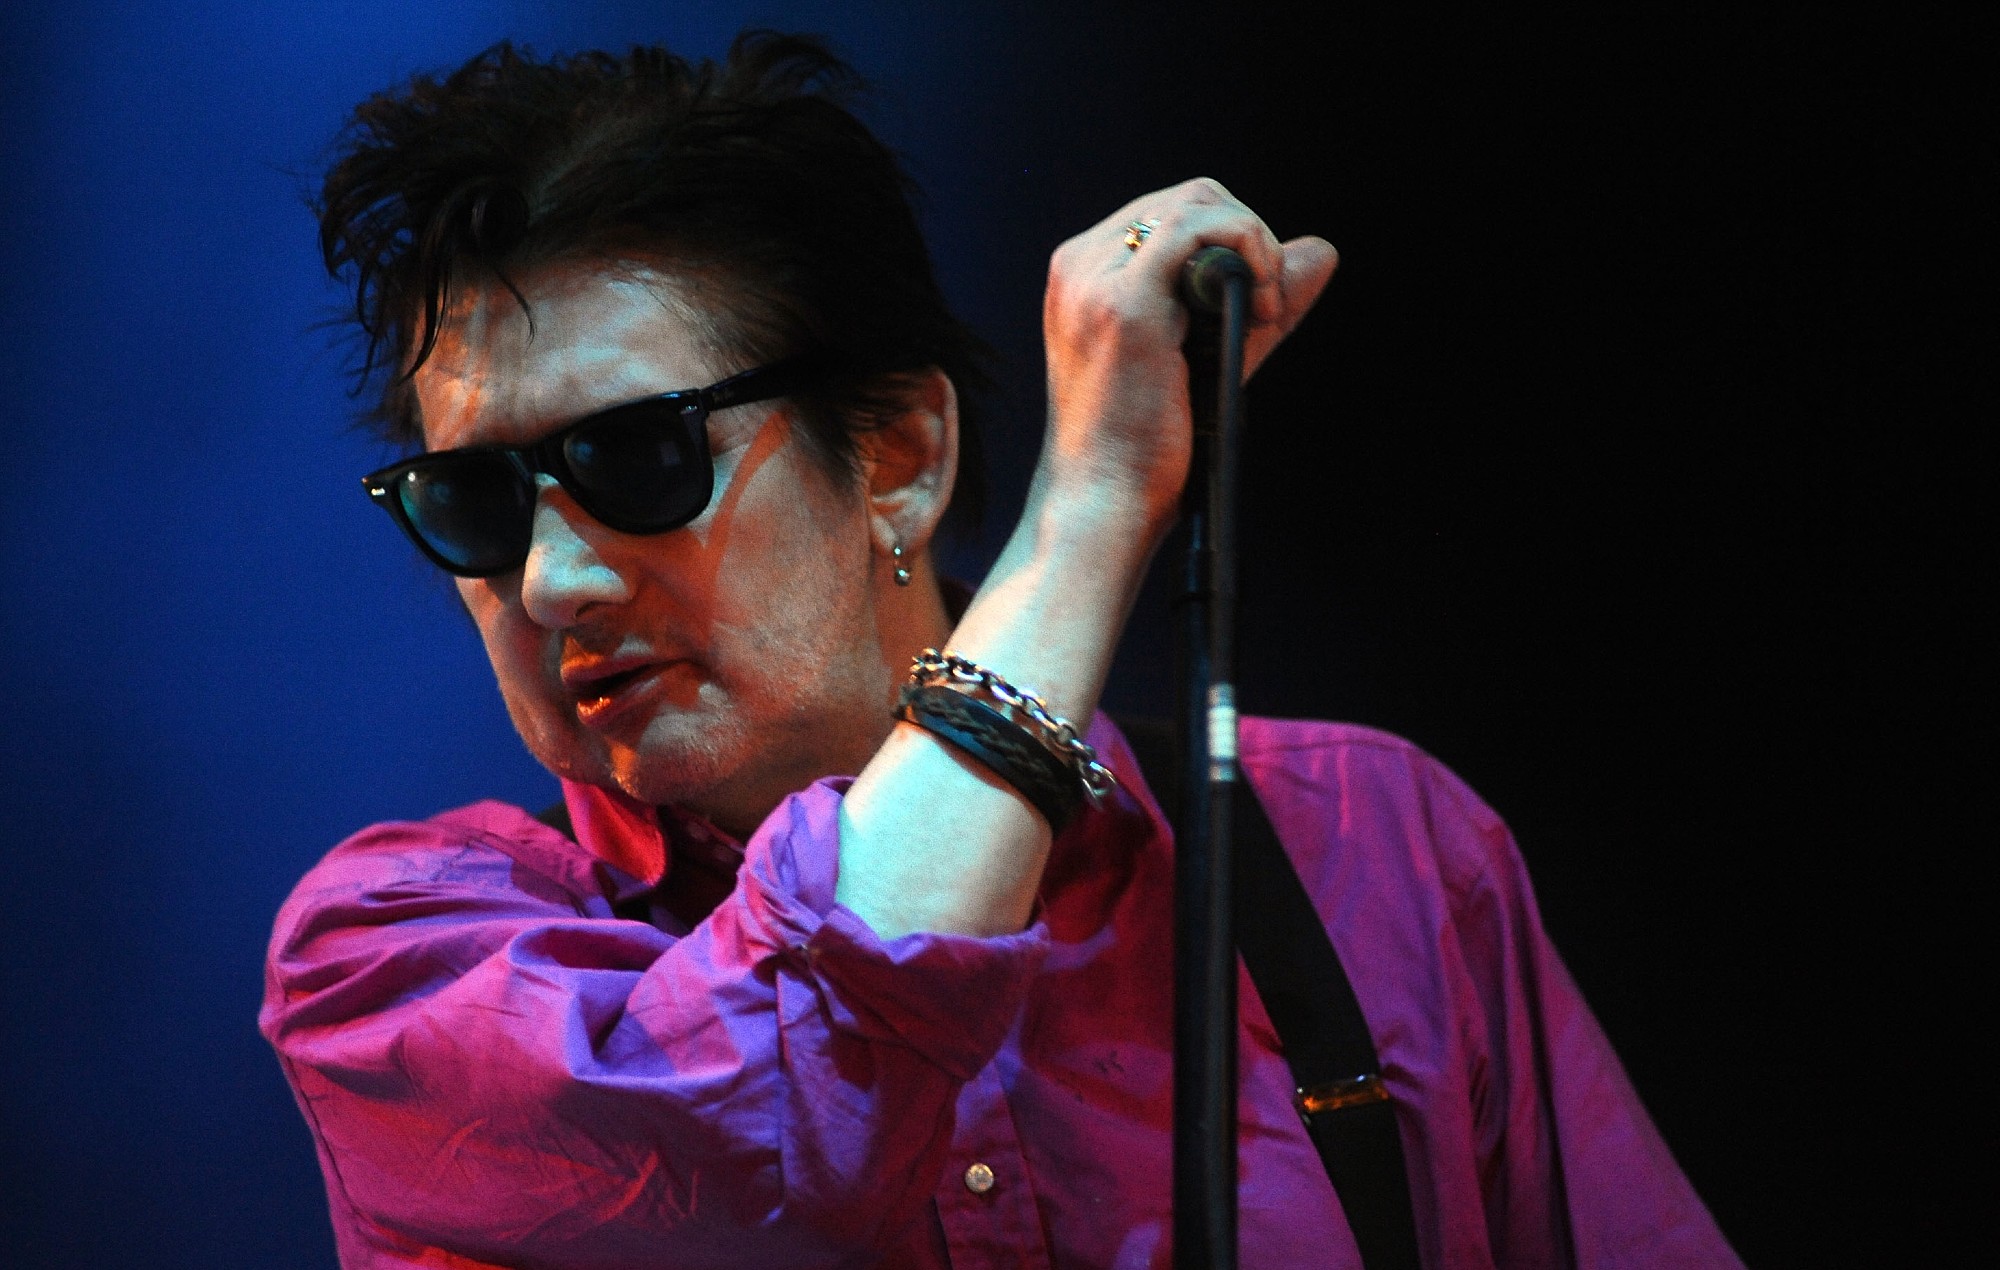 Shane MacGowan’s wife shares “terrifying fears of loss” as Pogues bandmates visit icon in hospital